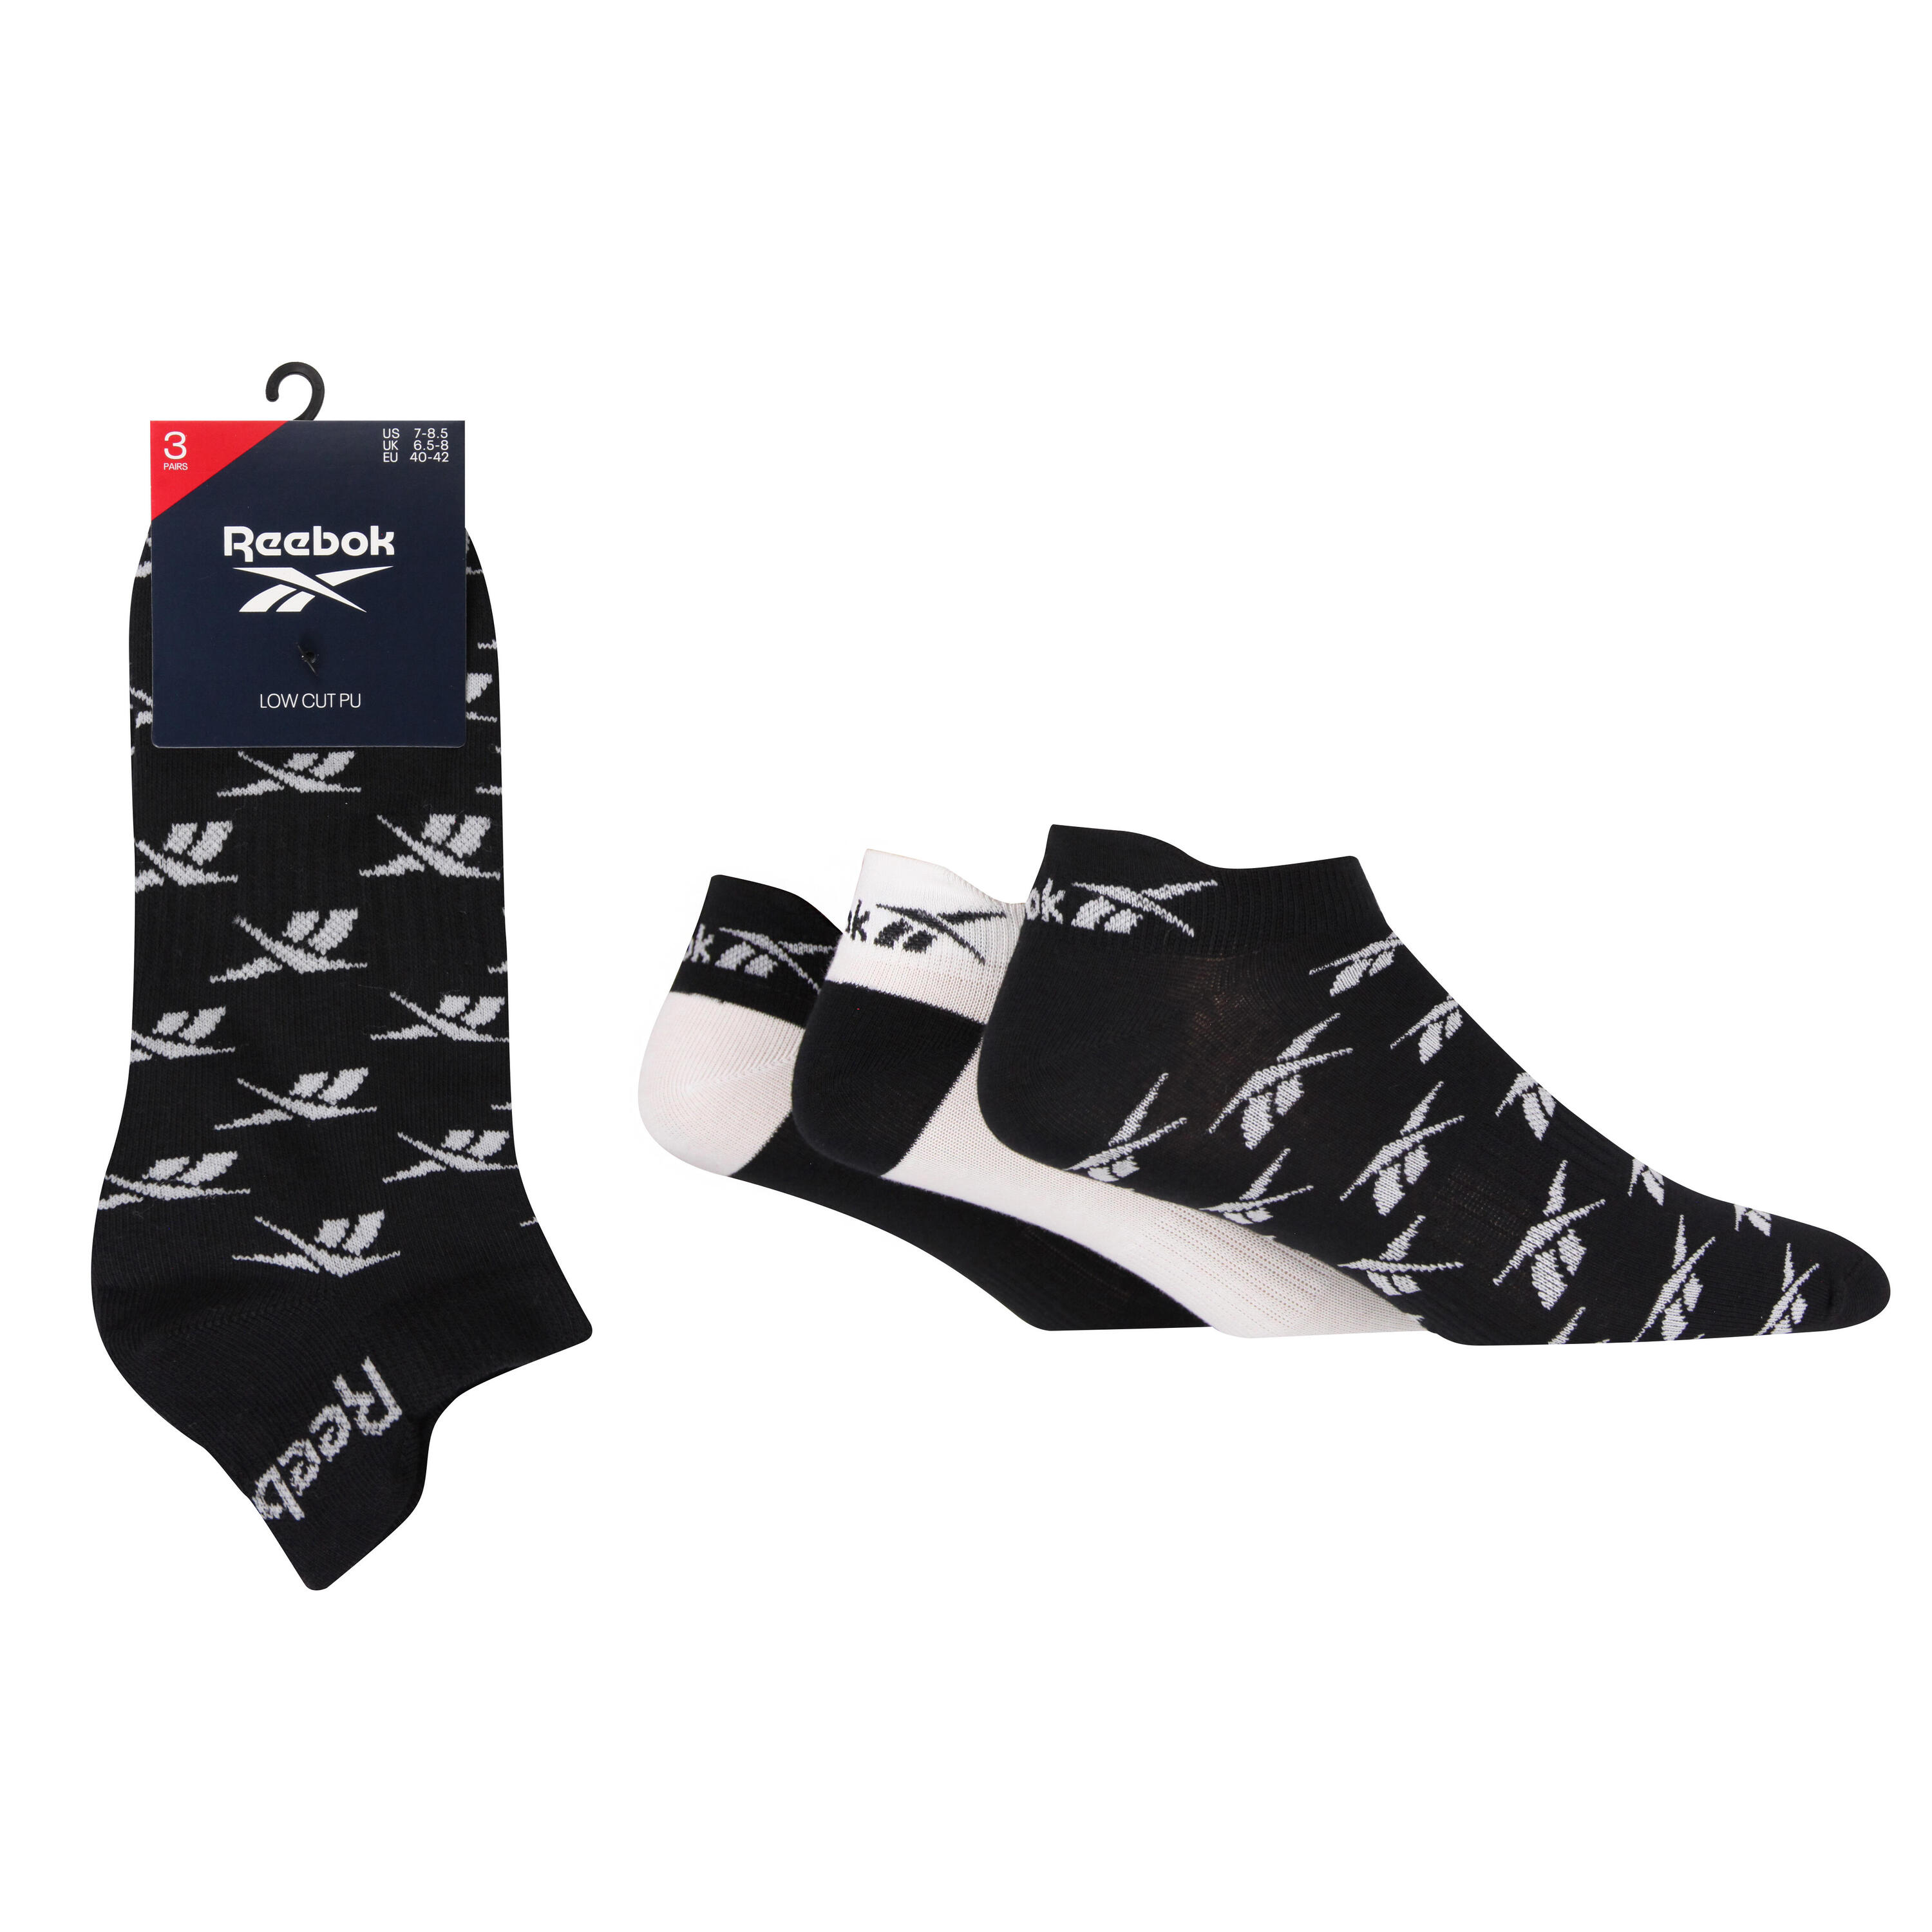 REEBOK 3 Pair Pack Low Cut Trainer Sports Socks With  Heel Tab And Seamless Toes